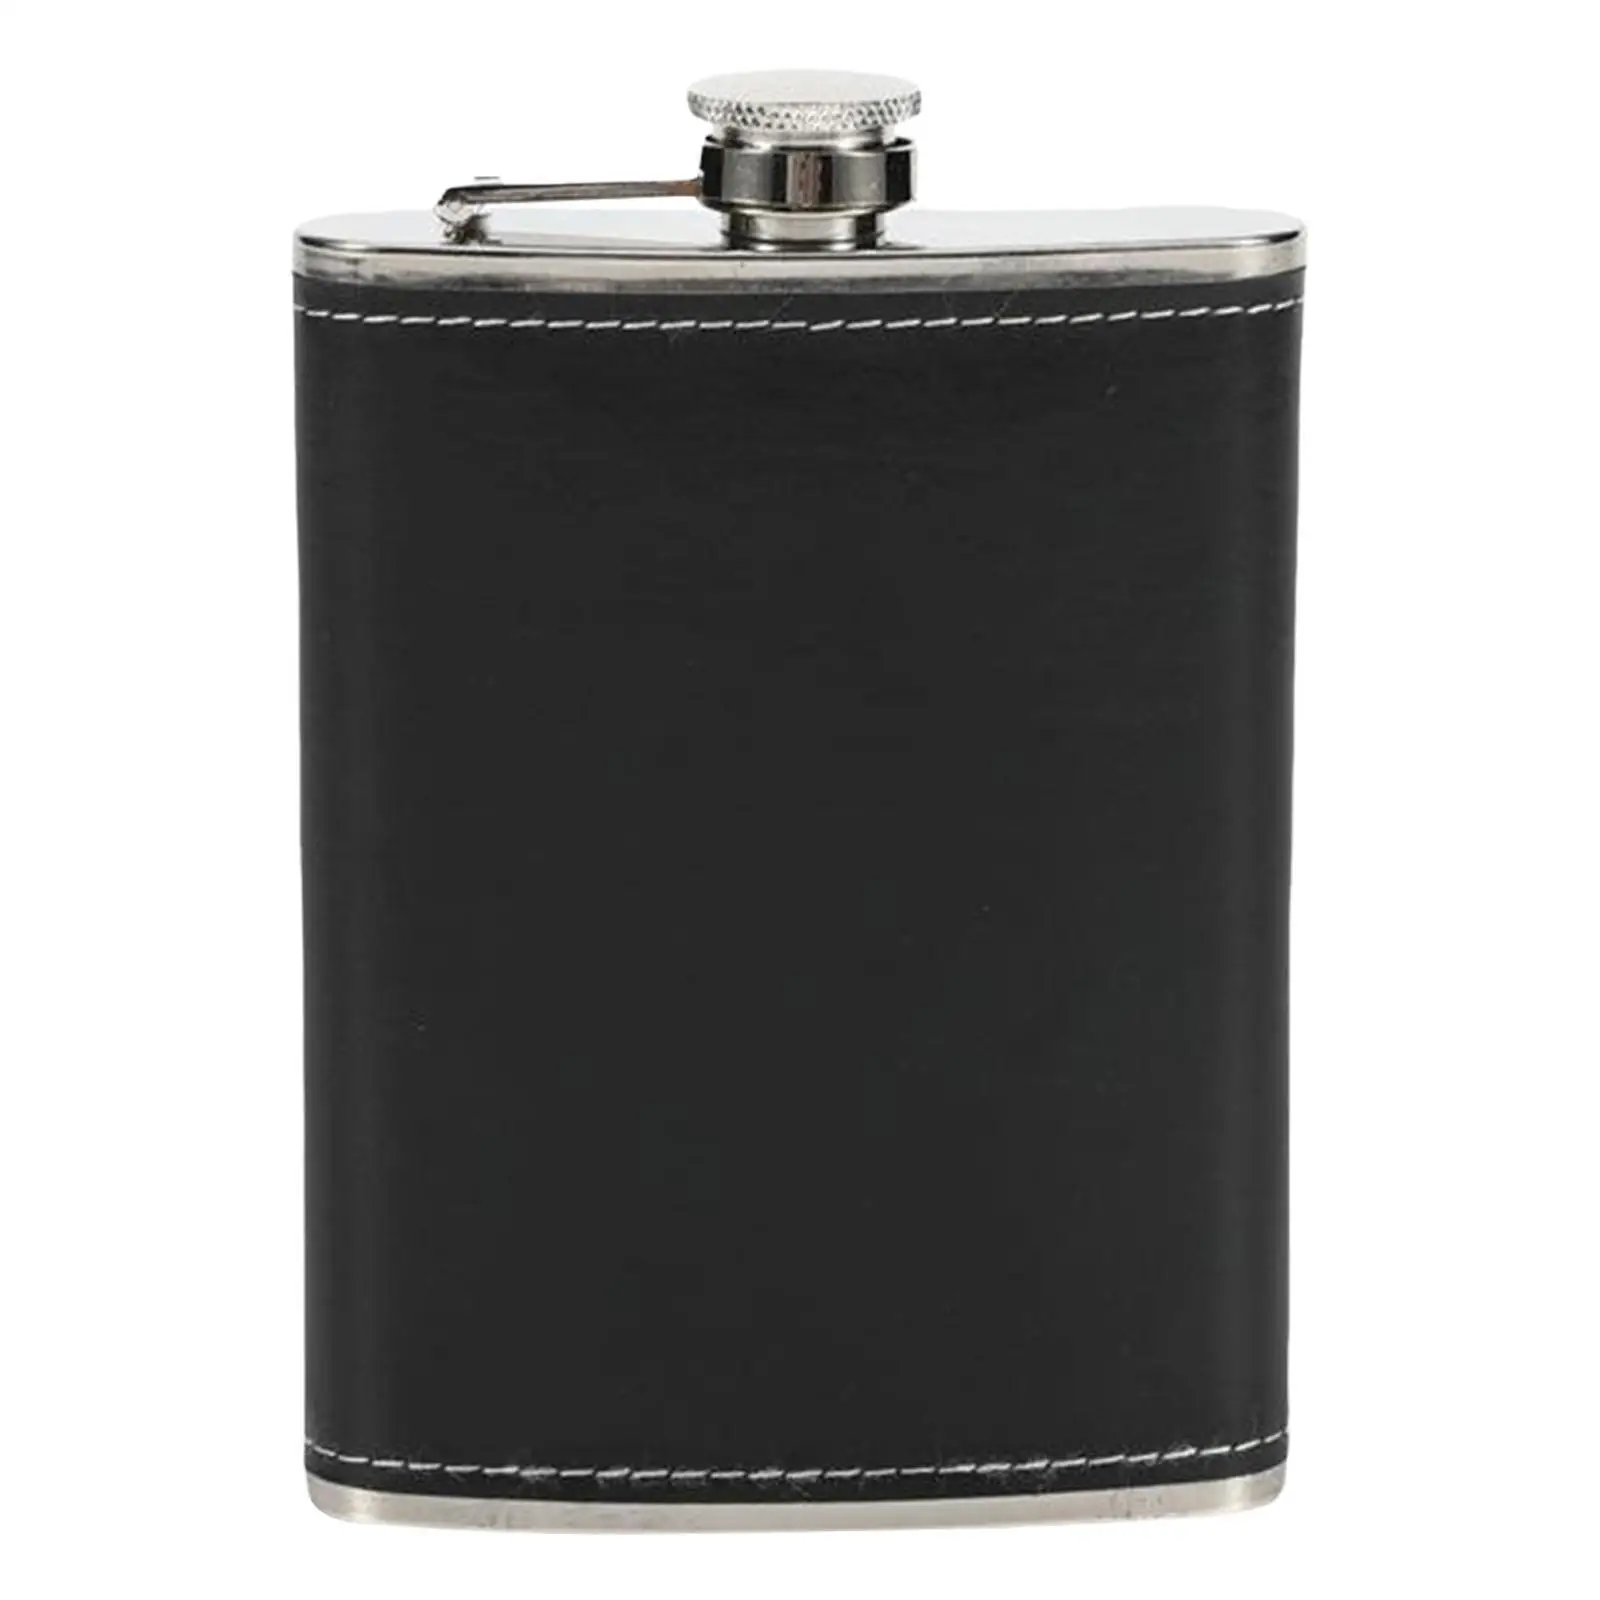 Hip Flask Leakproof Stainless Steel Painted Vintage 8 oz Black Sealed Liquor Pocket for Outdoor Hiking Camping Traveling whisky